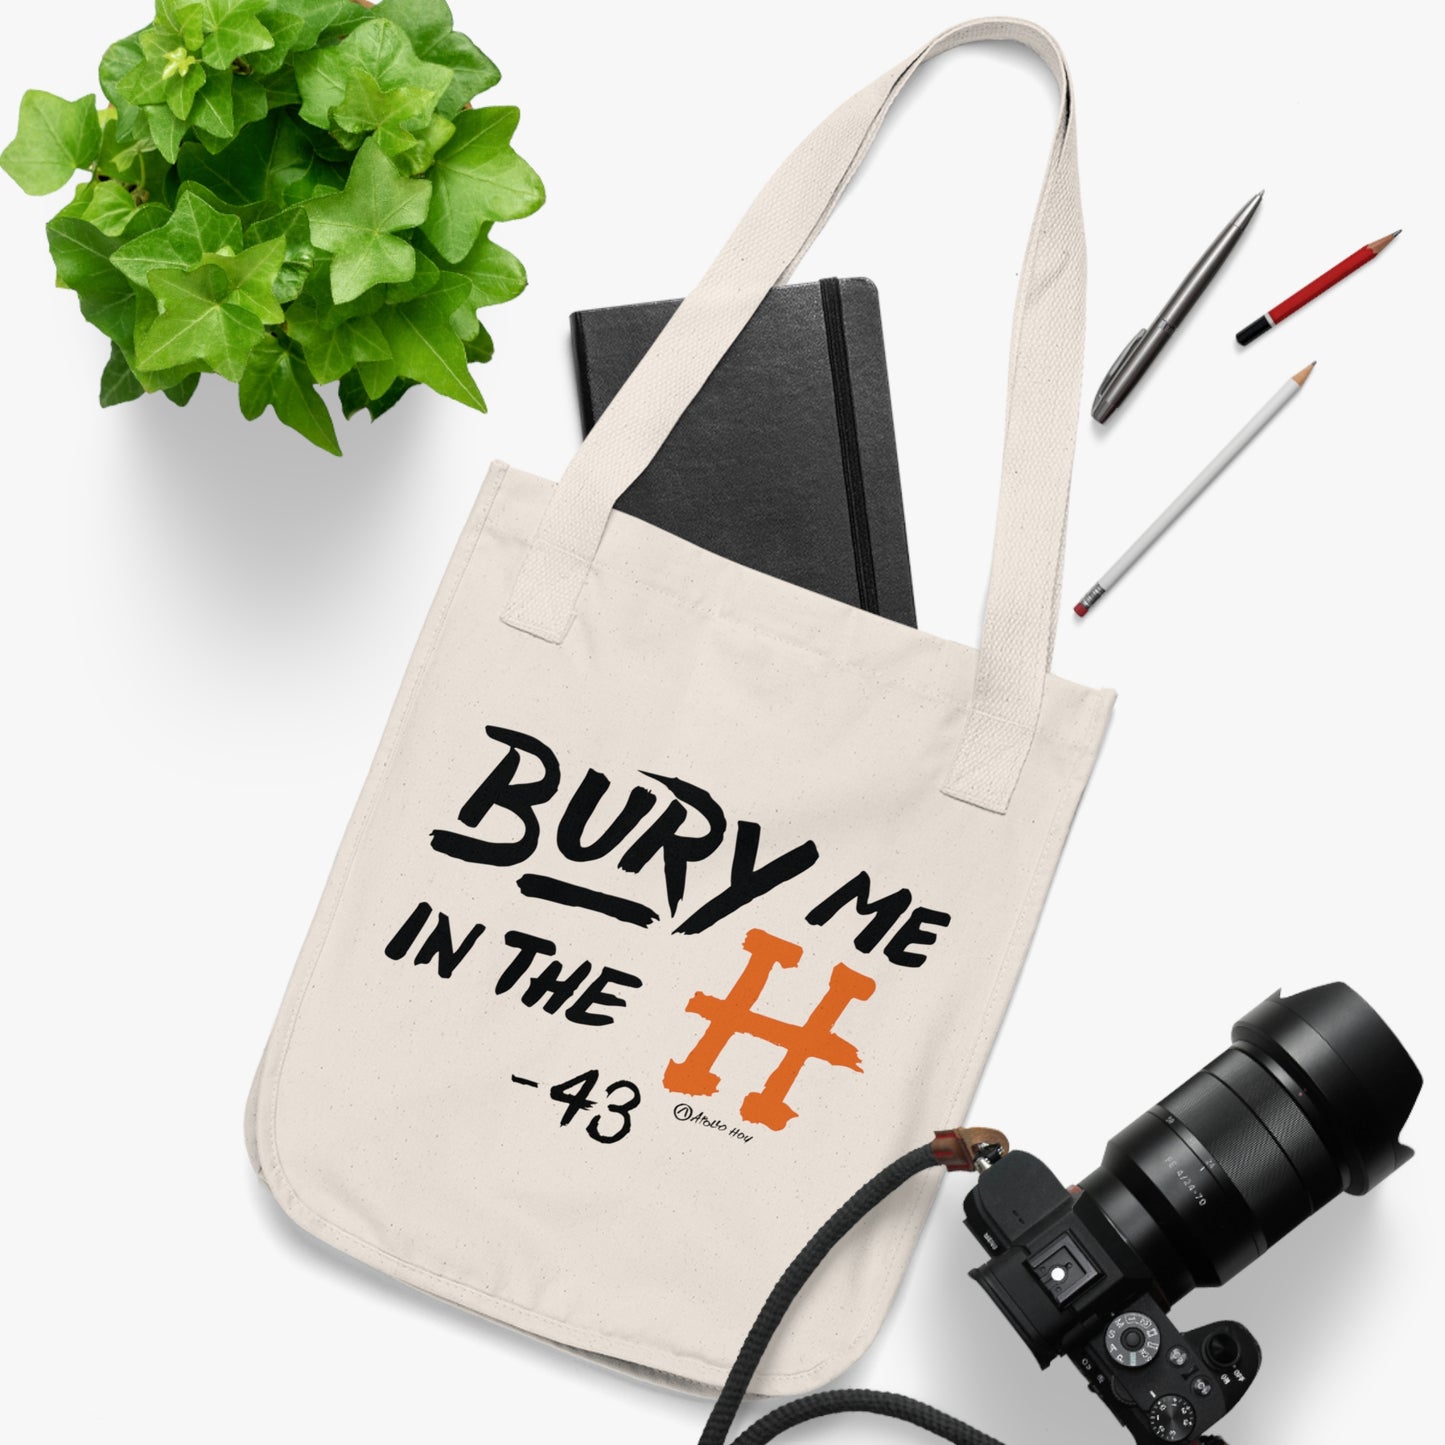 Bury Me In The H Canvas Tote Bag